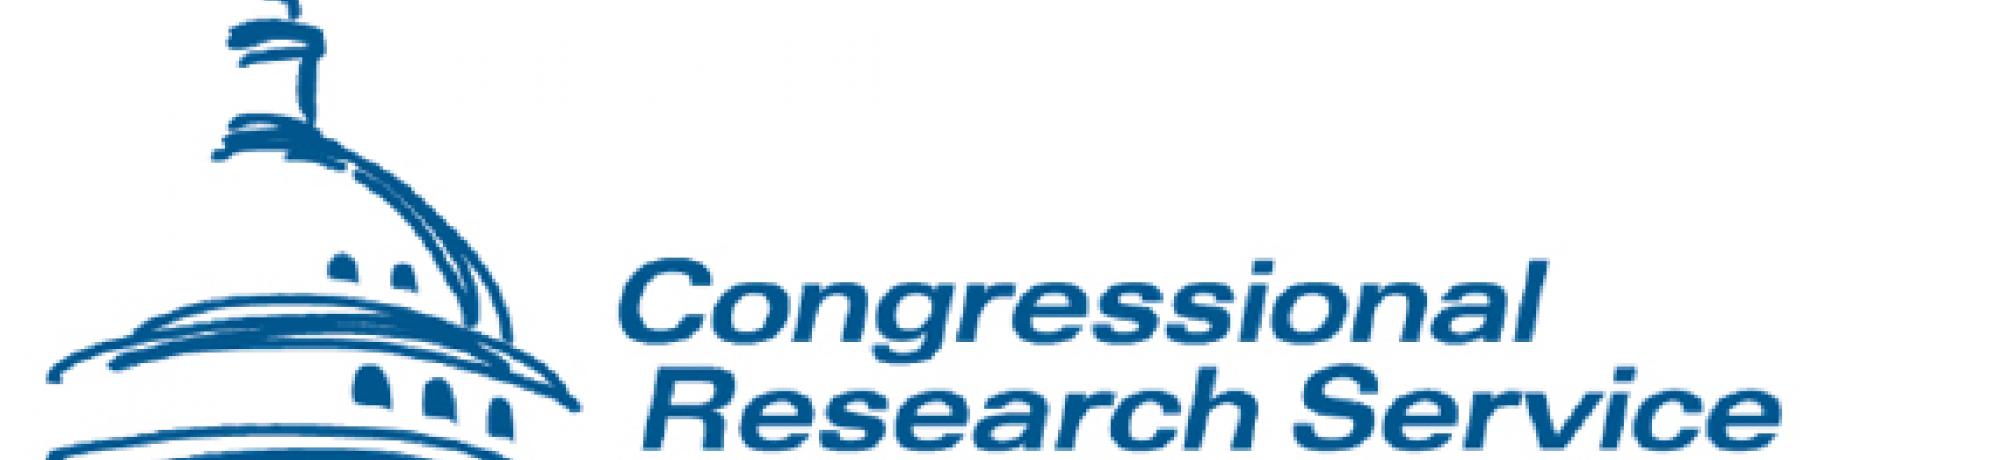 Congressional Research Service